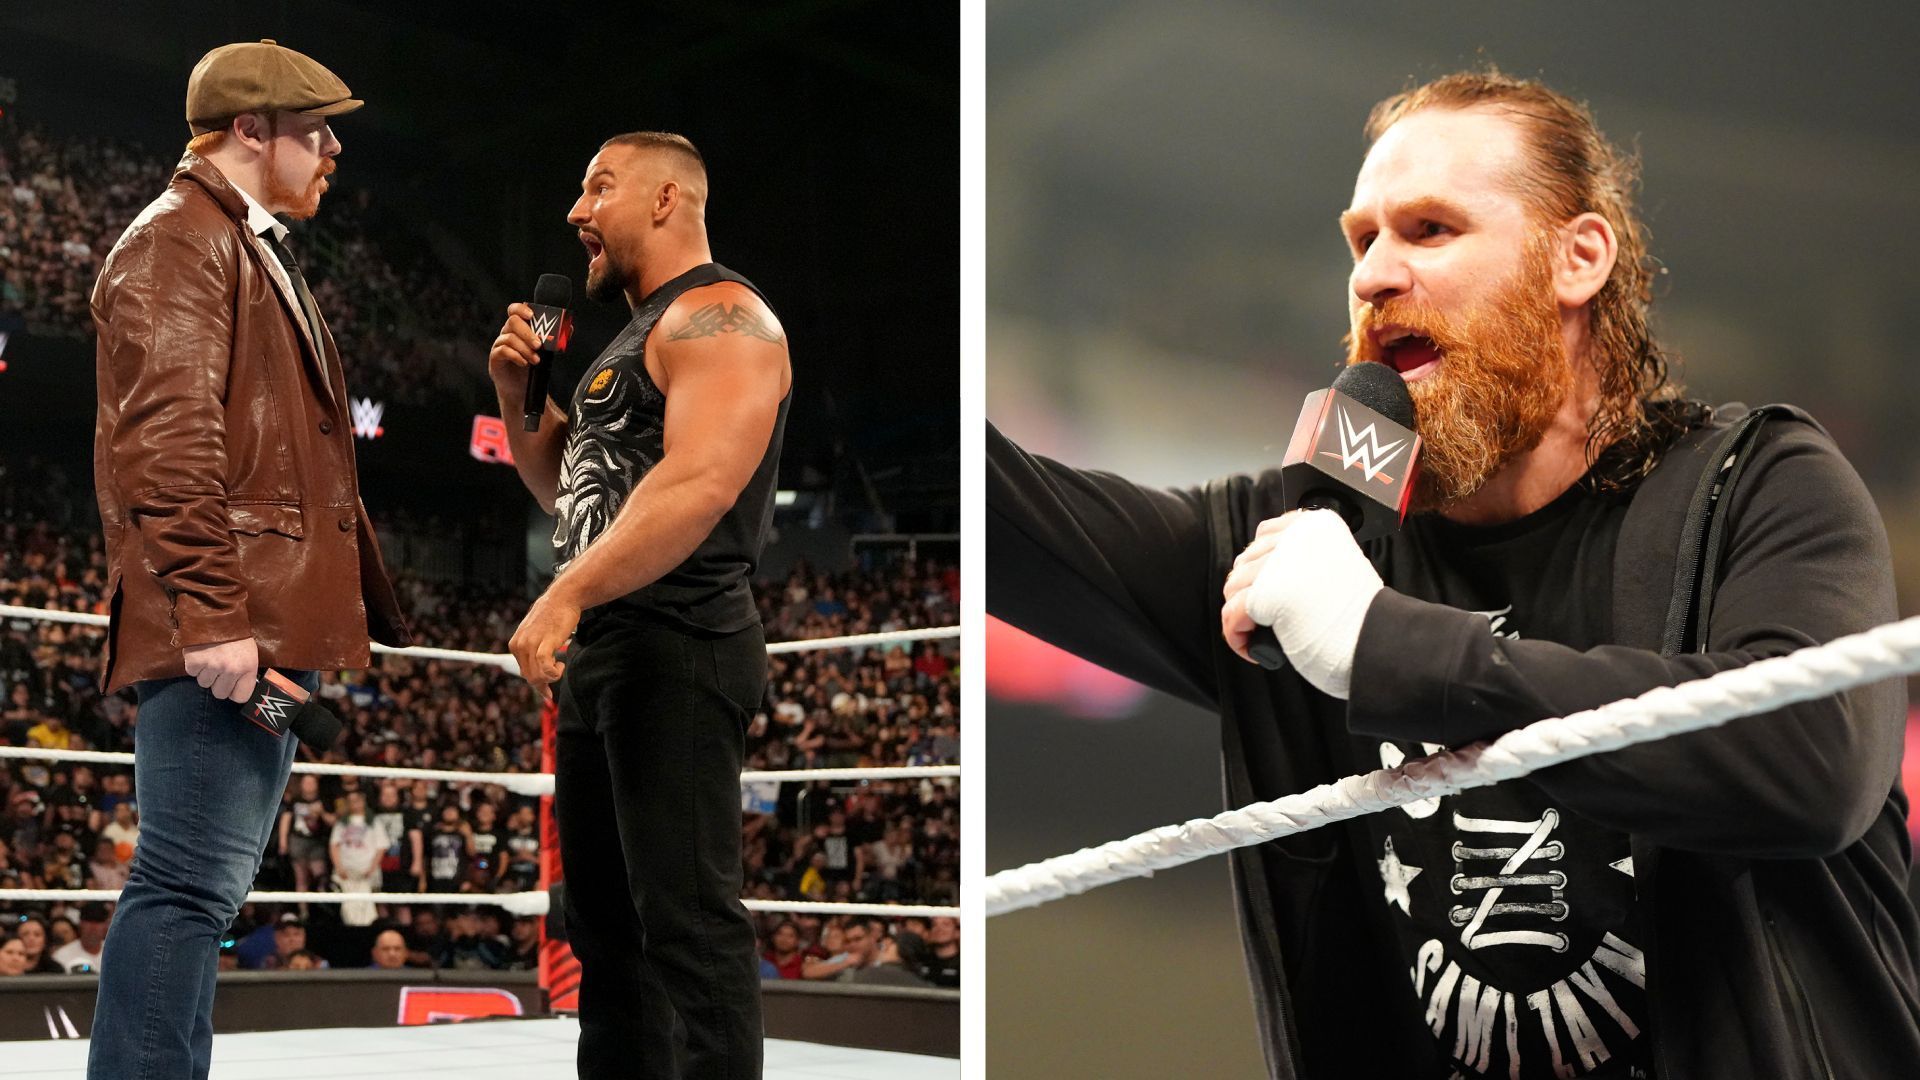 Sami Zayn could wrestle three other opponents for his WWE Intercontinental Title [Credit: WWE.com]